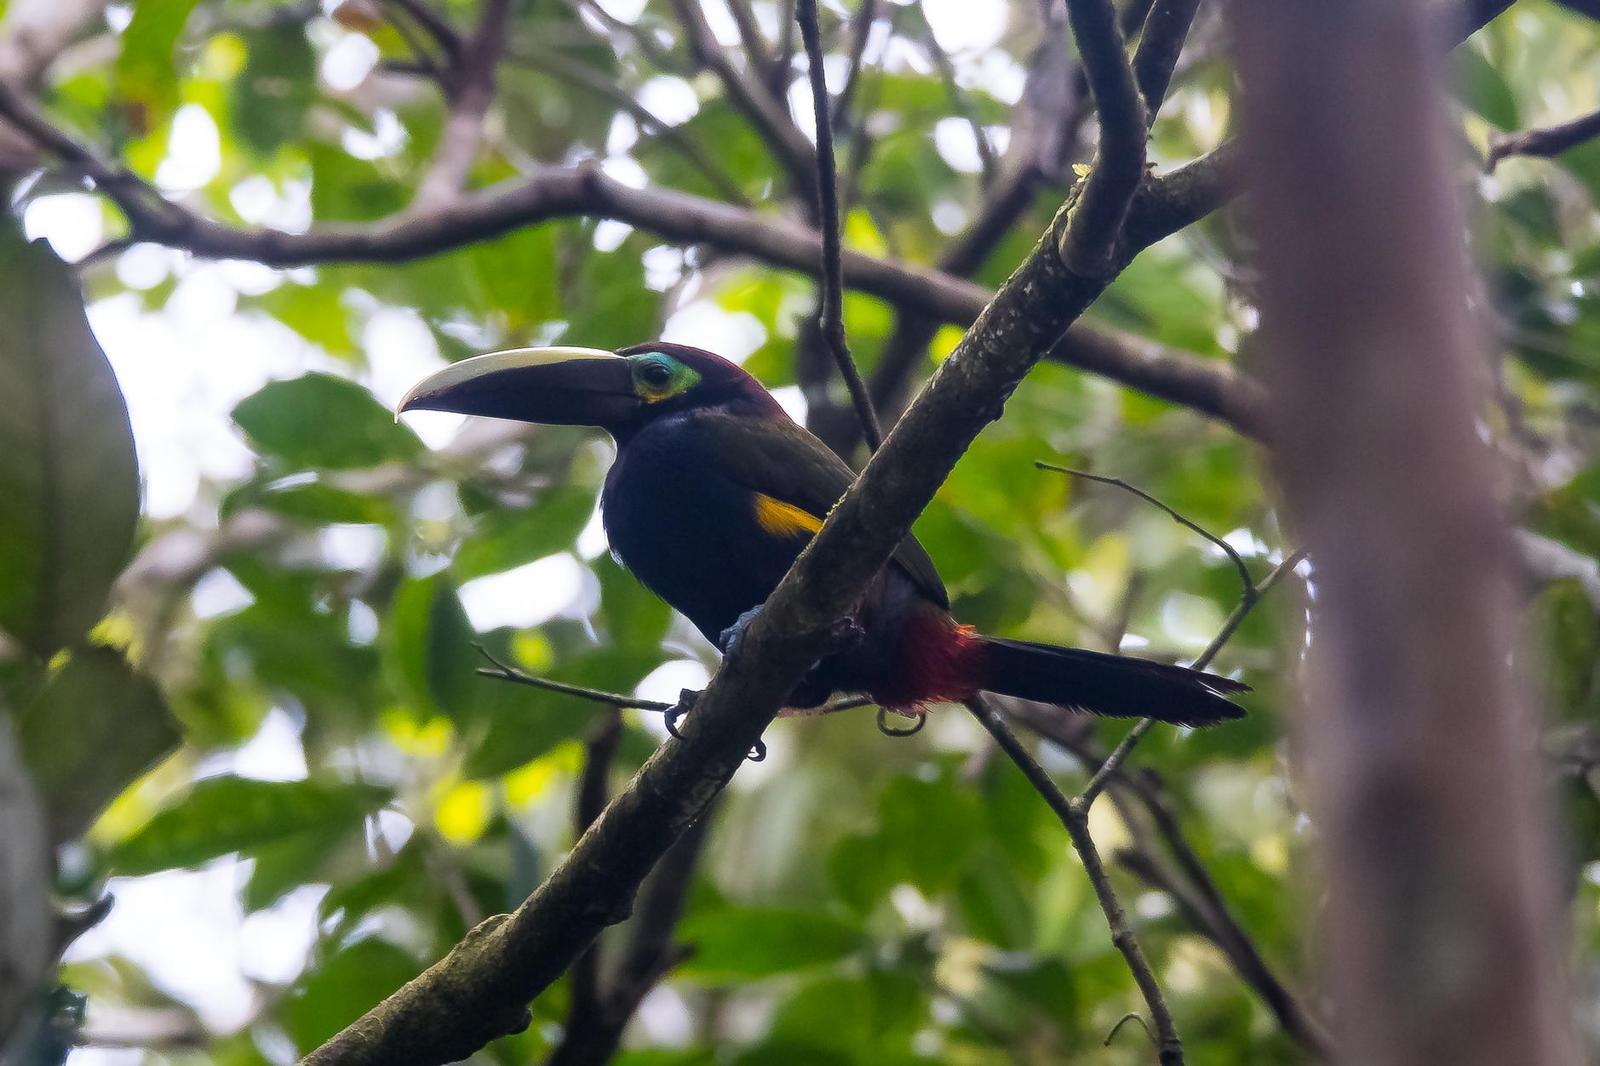 Yellow-eared Toucanet Photo by Gerald Hoekstra